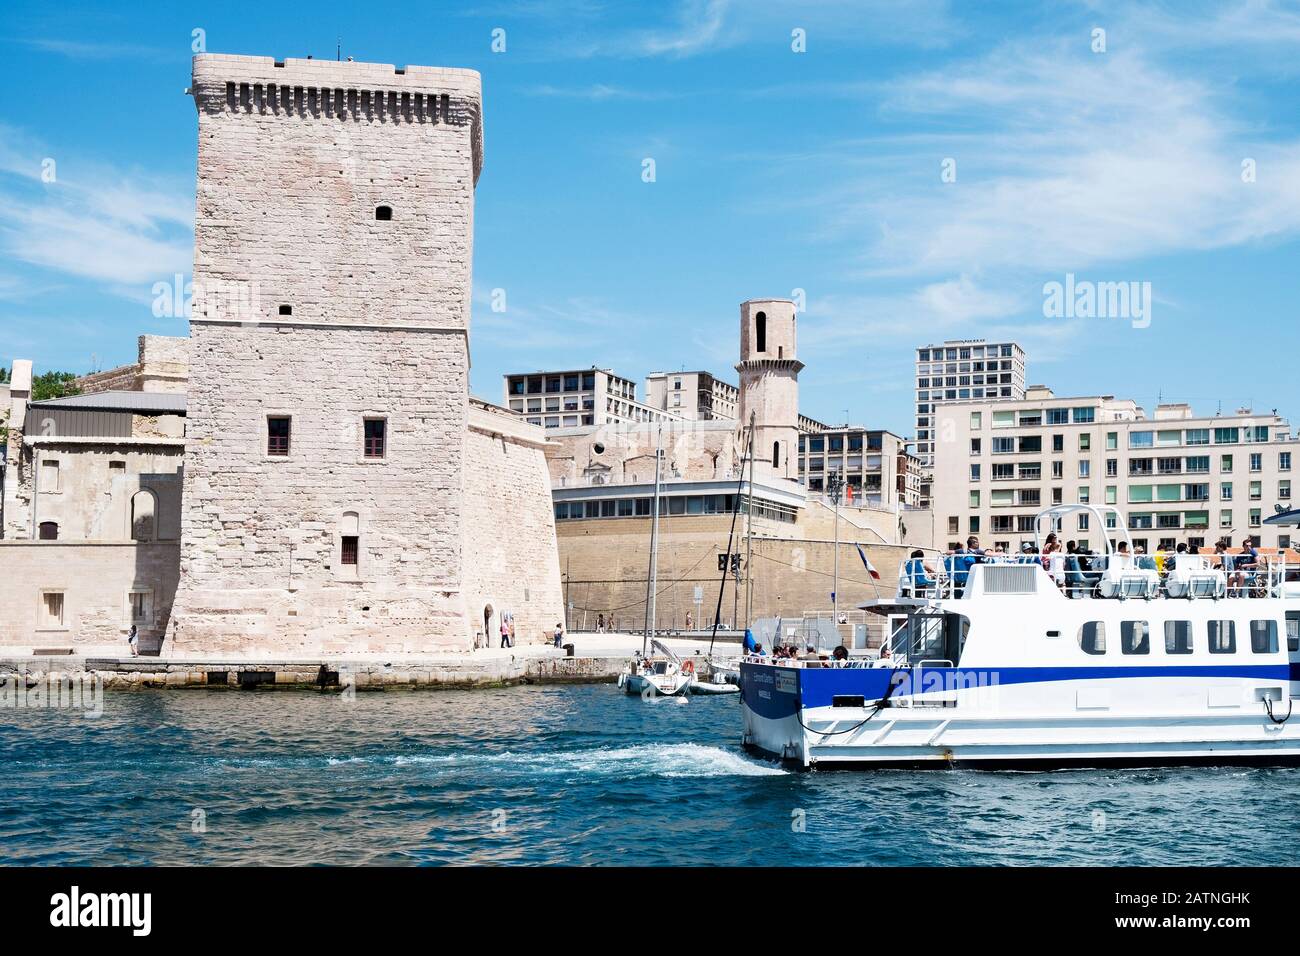 MARSEILLE, FRANCE - MAY 17, 2015: A view of the Fort Saint-Jean, built in the seventeenth century, in Marseille, France, surrounded by the Mediterrane Stock Photo